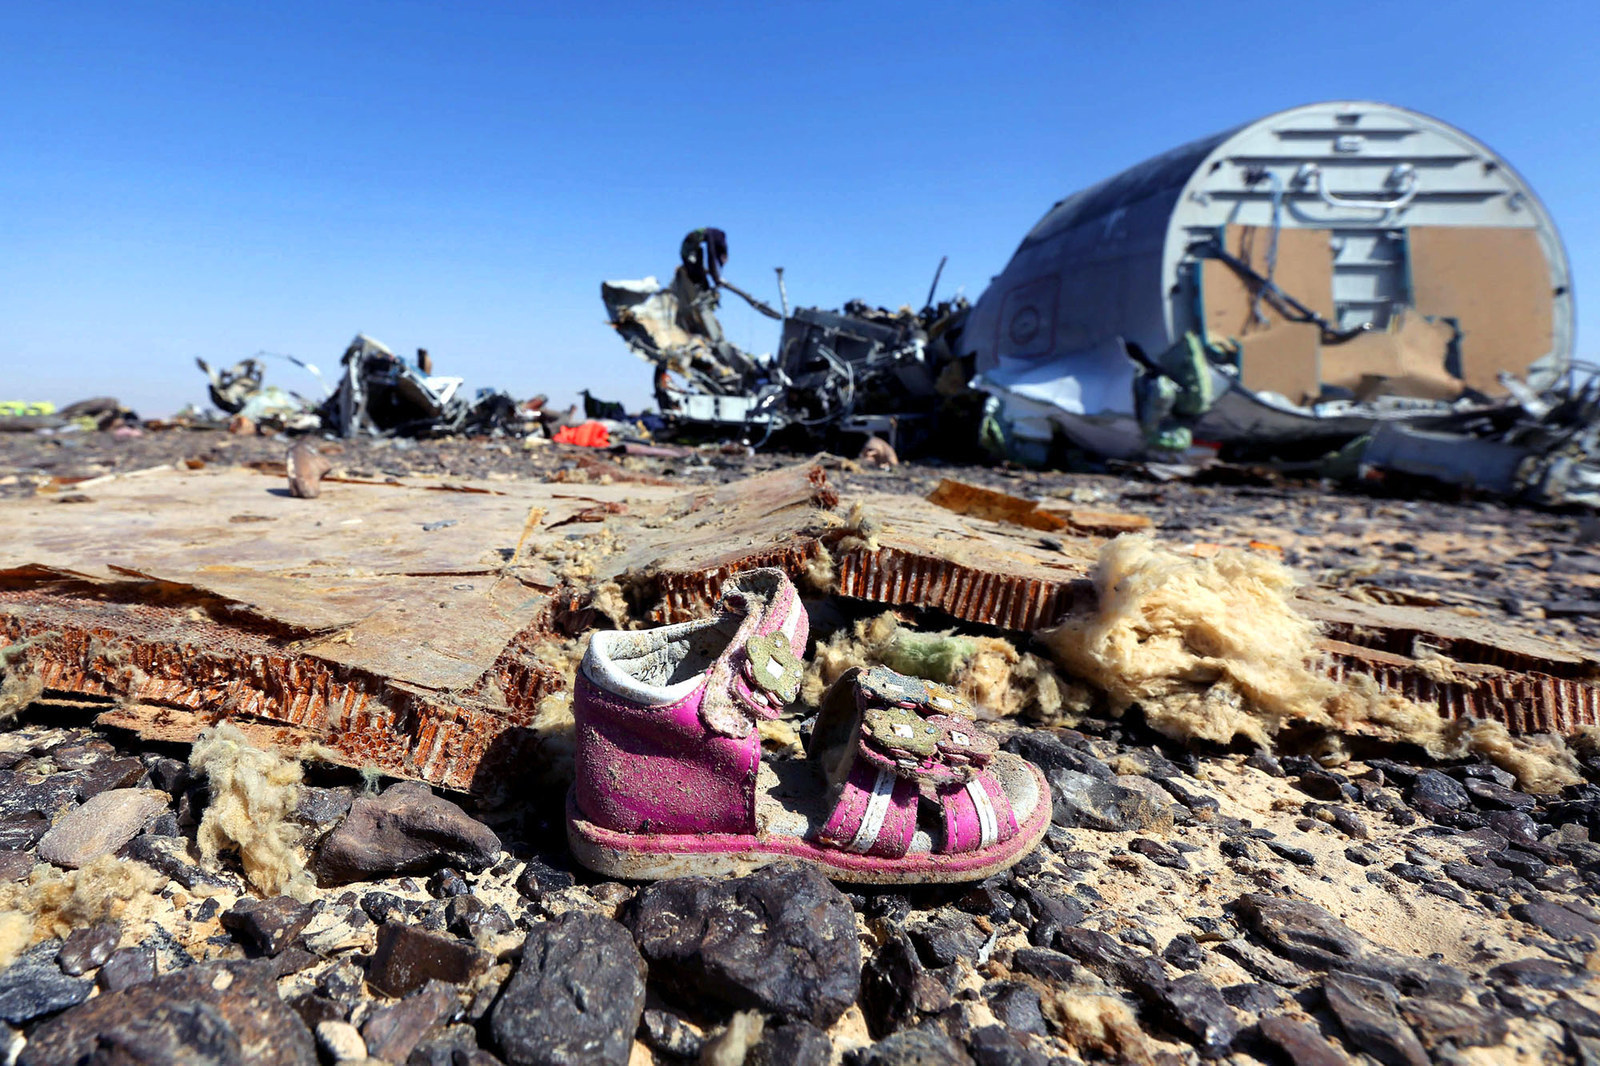 70 Of The Most Touching Photos Taken In 2015 - 70 Of The Most Touching Photos Taken In 2015 - A child's shoe lays by the wreckage of a Russian airliner which crashed in Egypt, killing all 224 on board. Russian and Western governments believe it was brought do